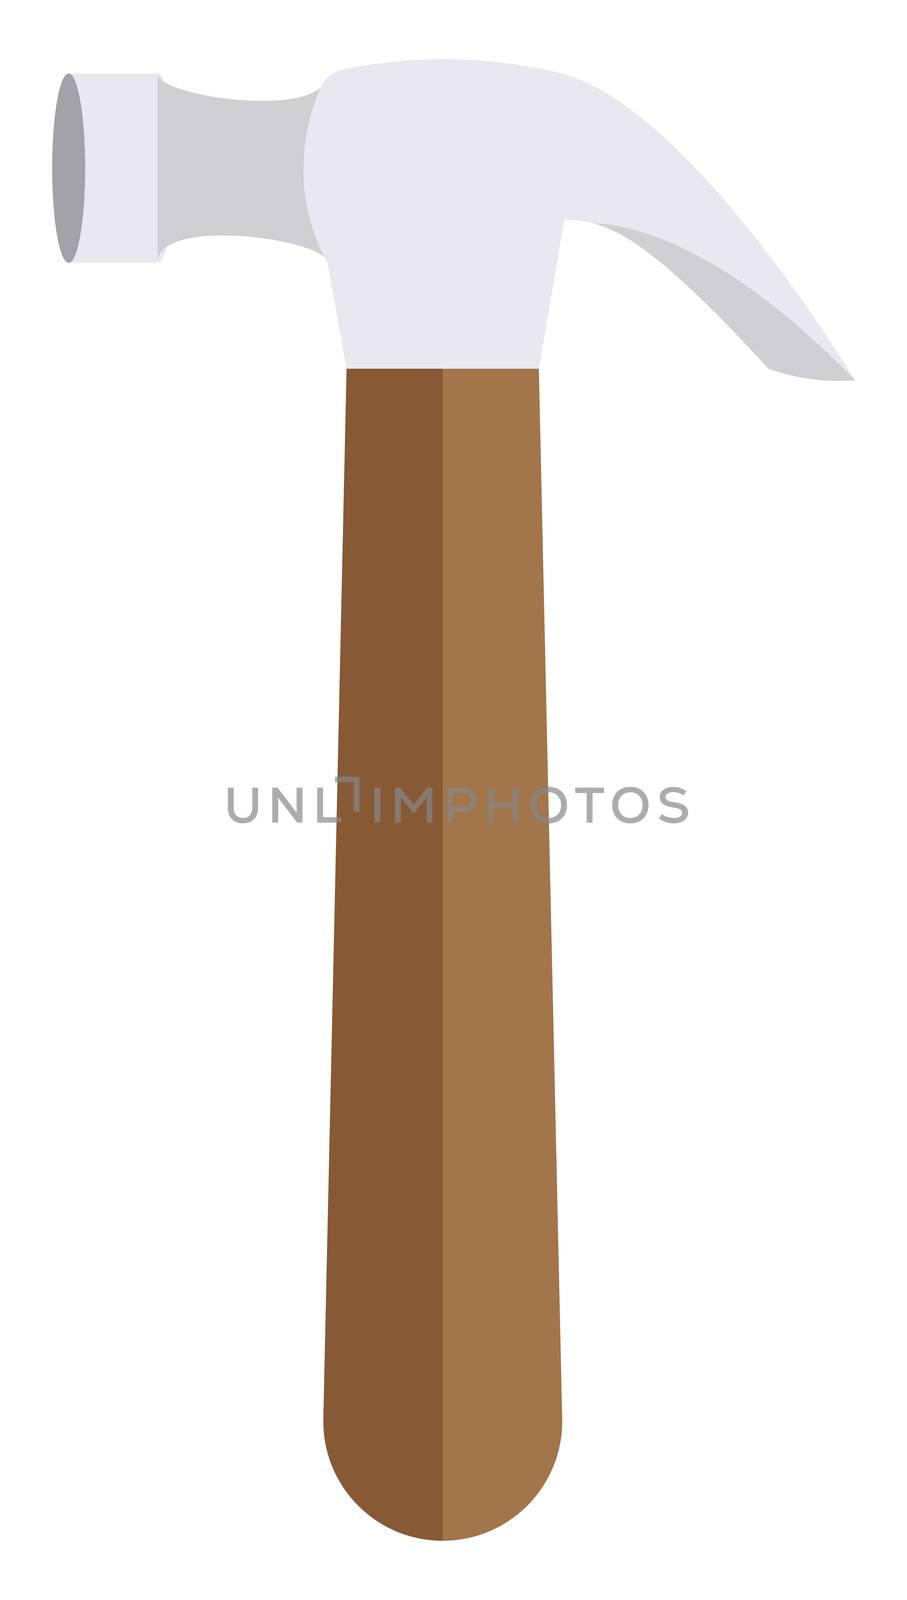 Claw hammer, illustration, vector on white background by Morphart